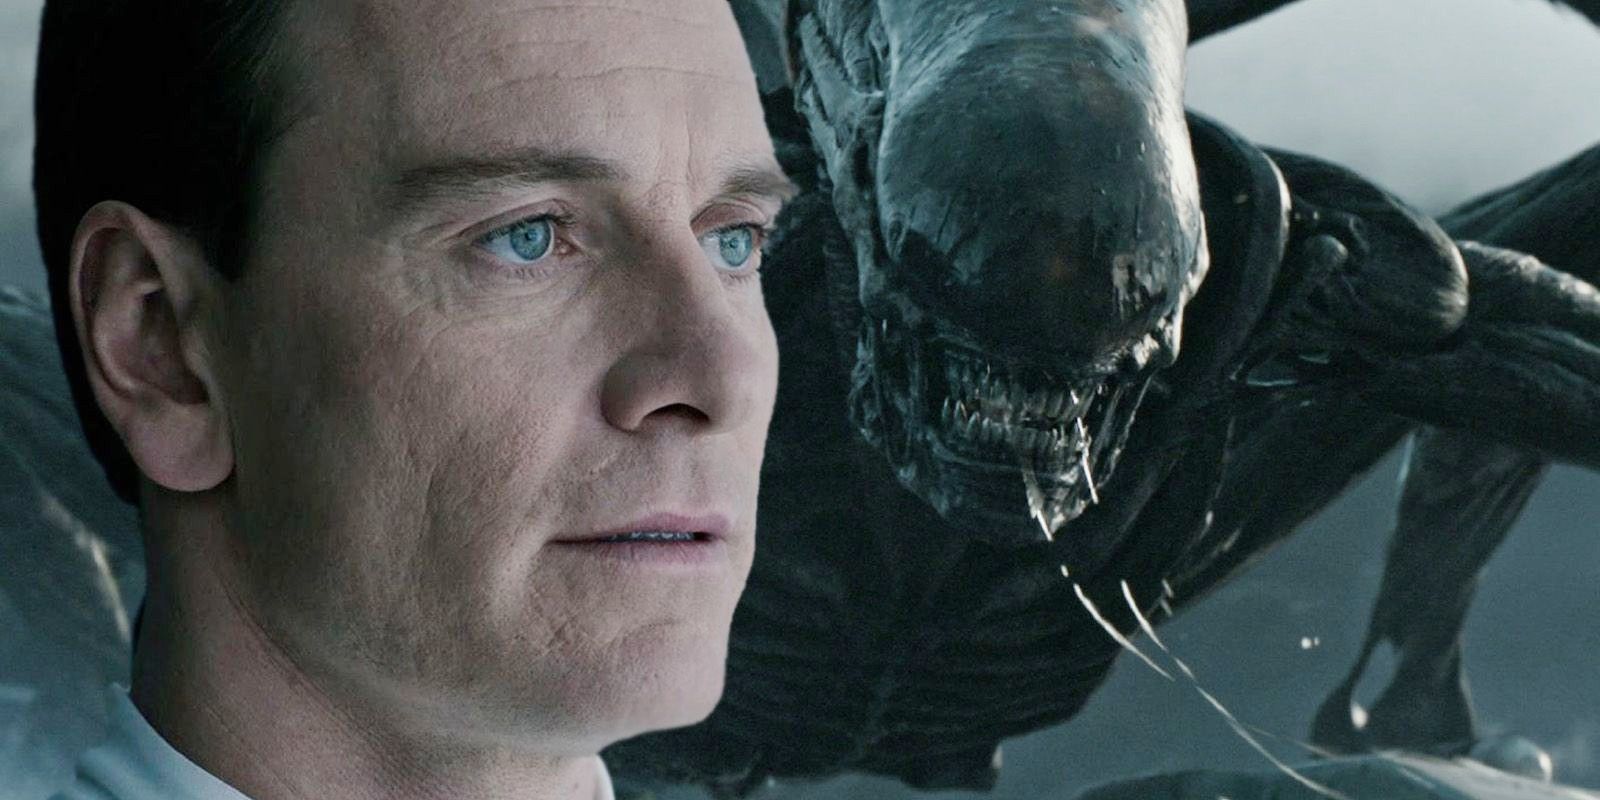 Michael Fassbender as Walter and Xenomorph from Alien Covenant